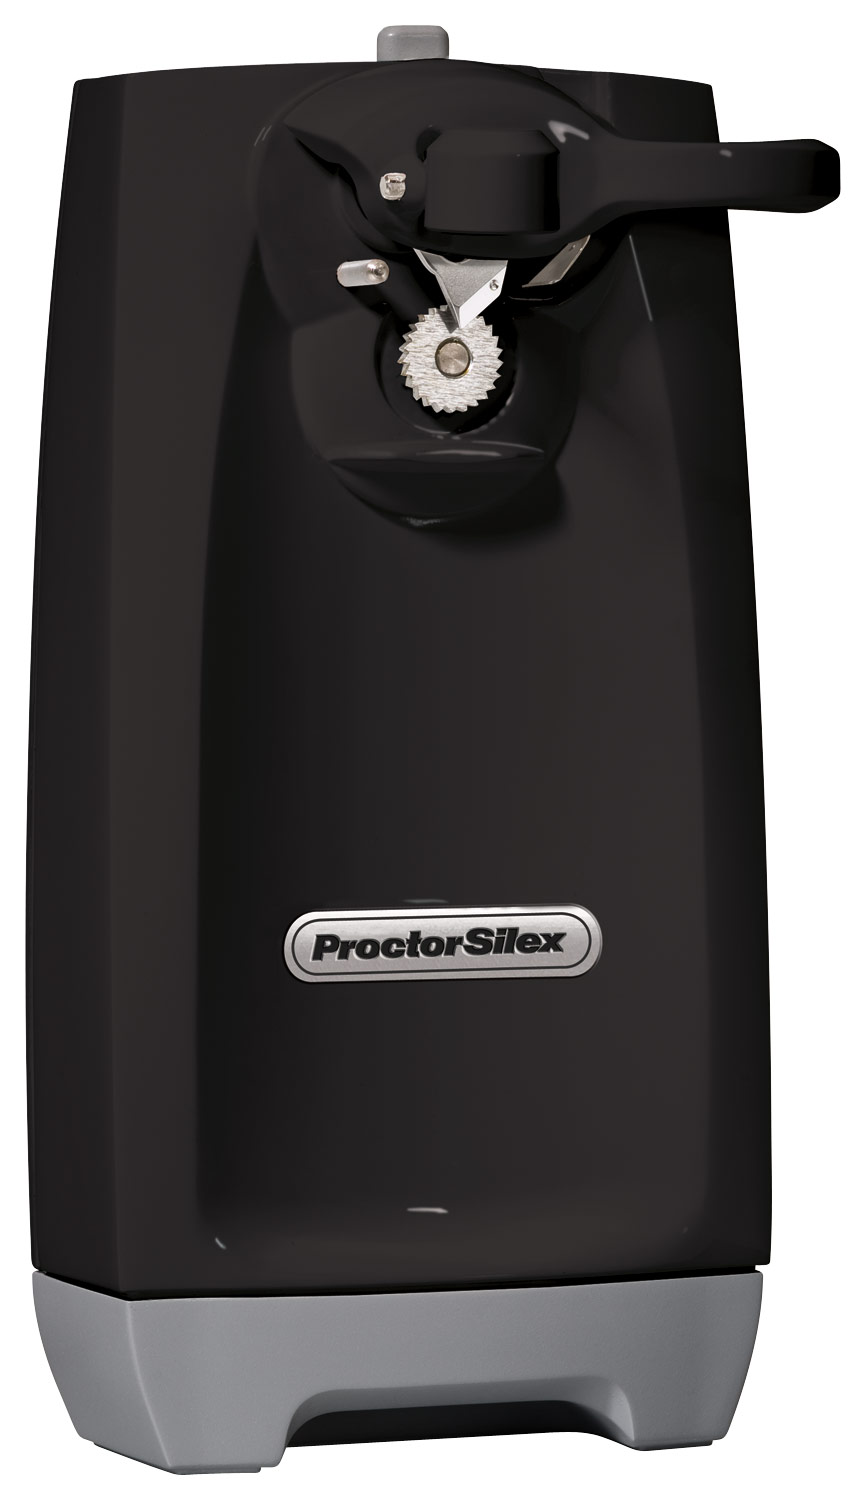 Proctor Silex Simply Better Electric Automatic Can Opener In White